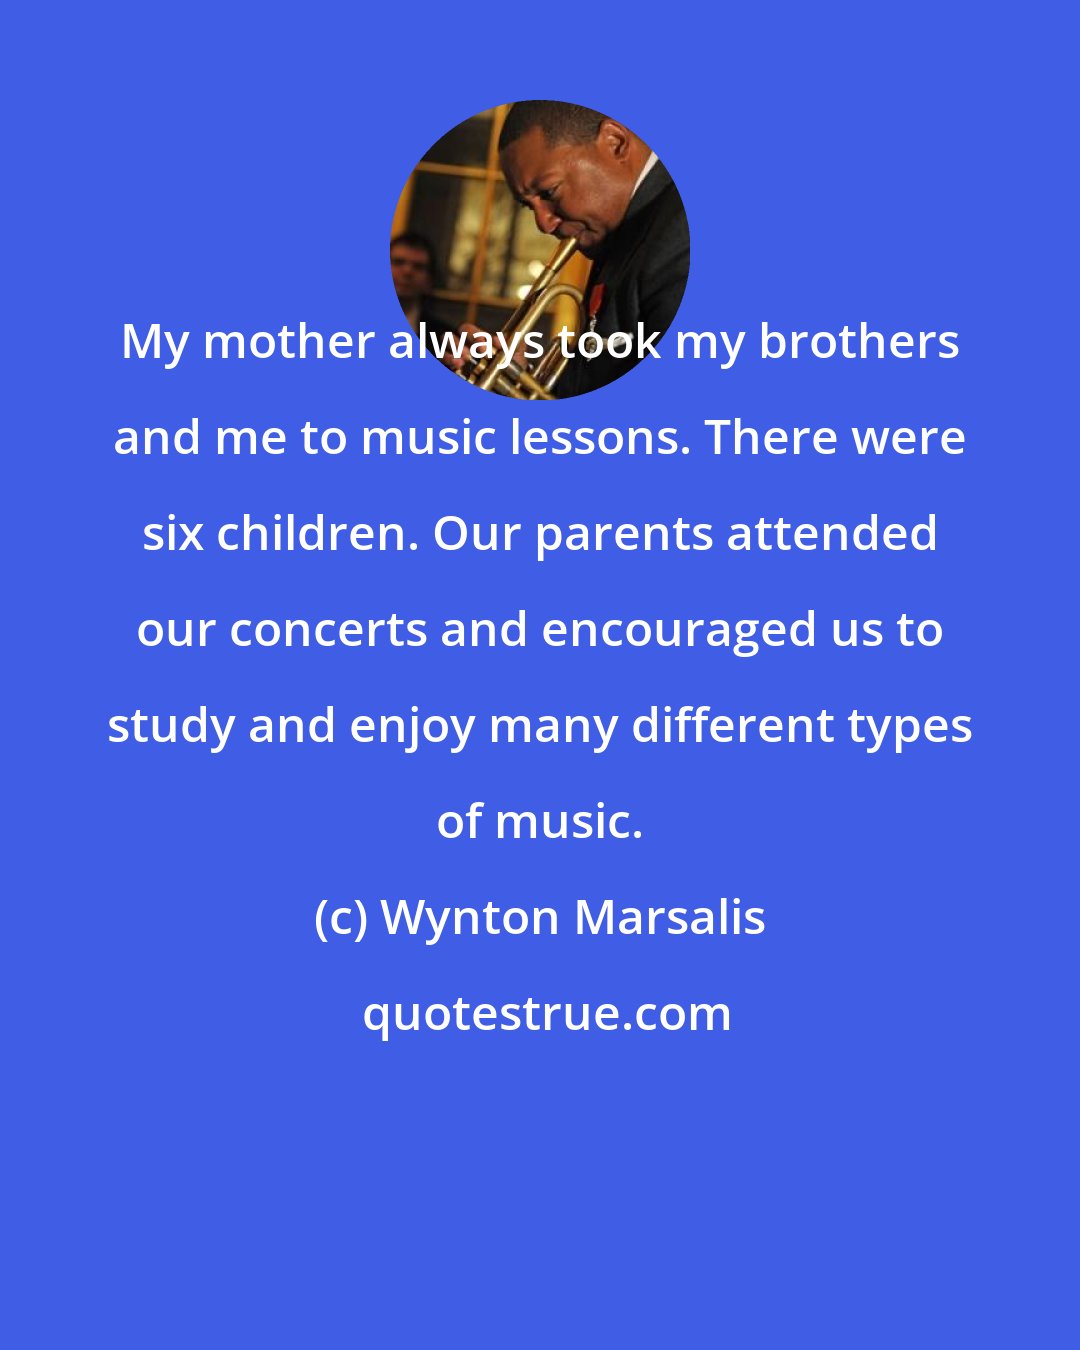 Wynton Marsalis: My mother always took my brothers and me to music lessons. There were six children. Our parents attended our concerts and encouraged us to study and enjoy many different types of music.